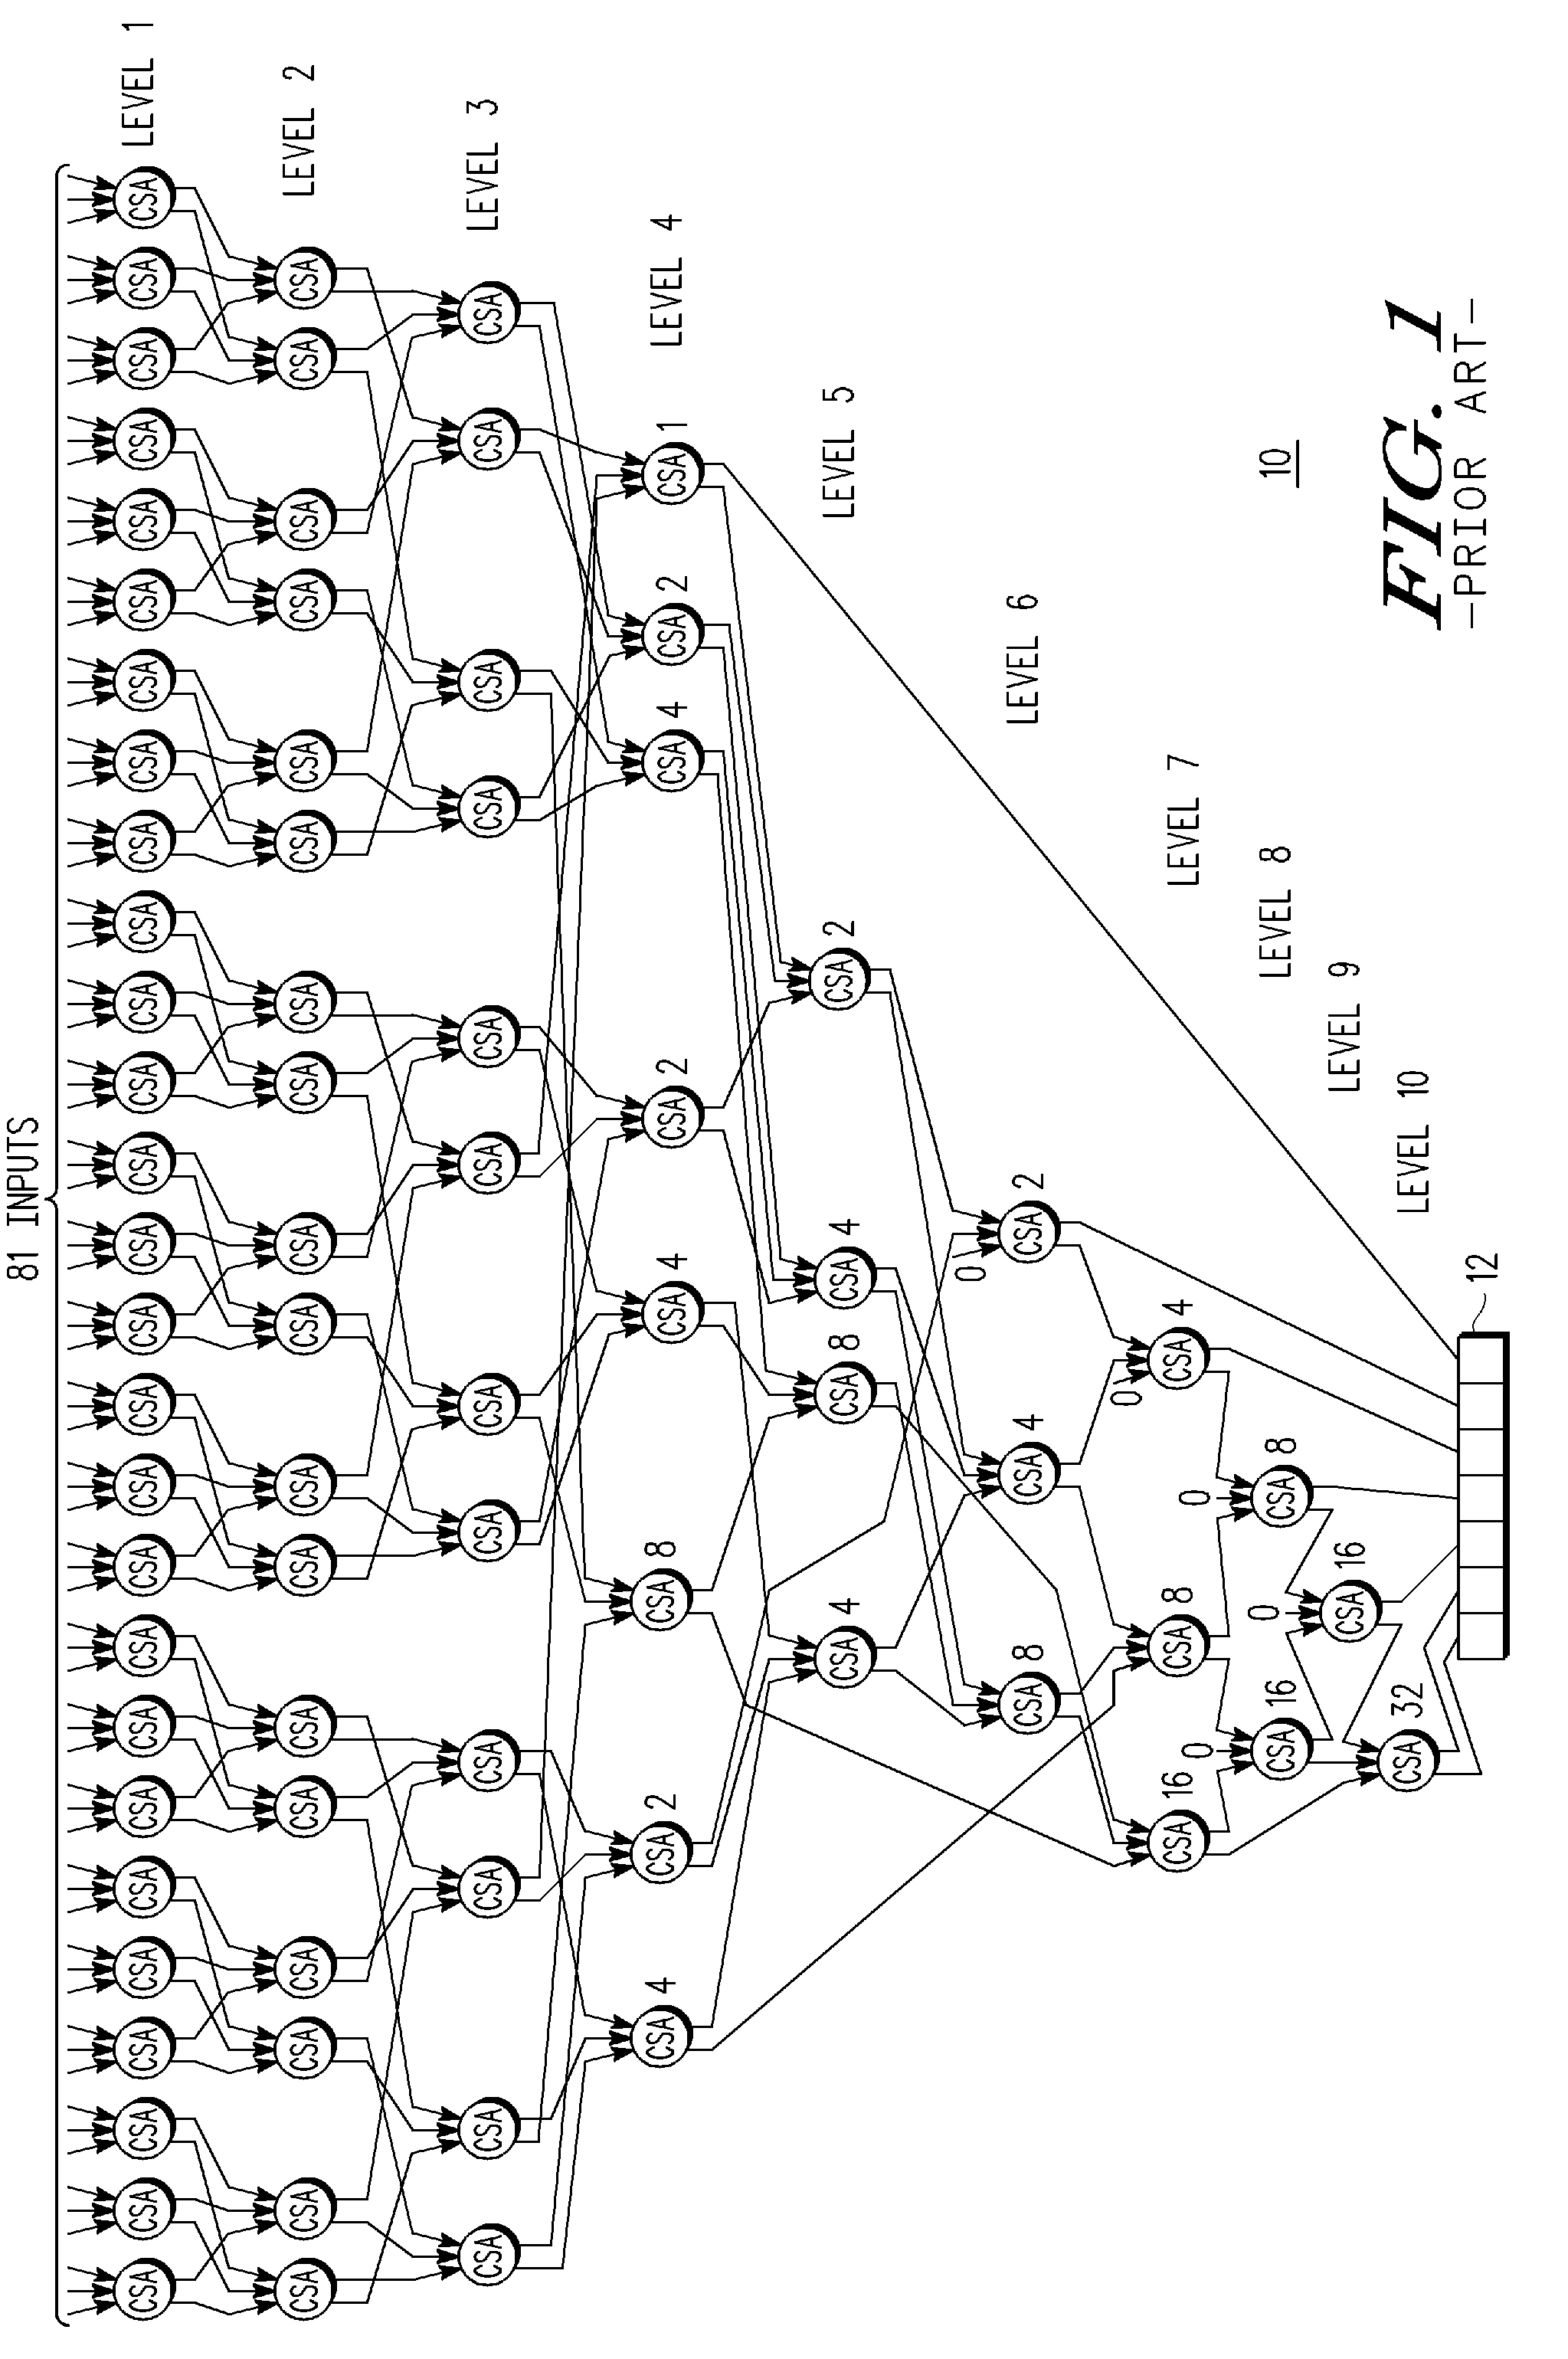 Circuit and method for correlated inputs to a population count circuit